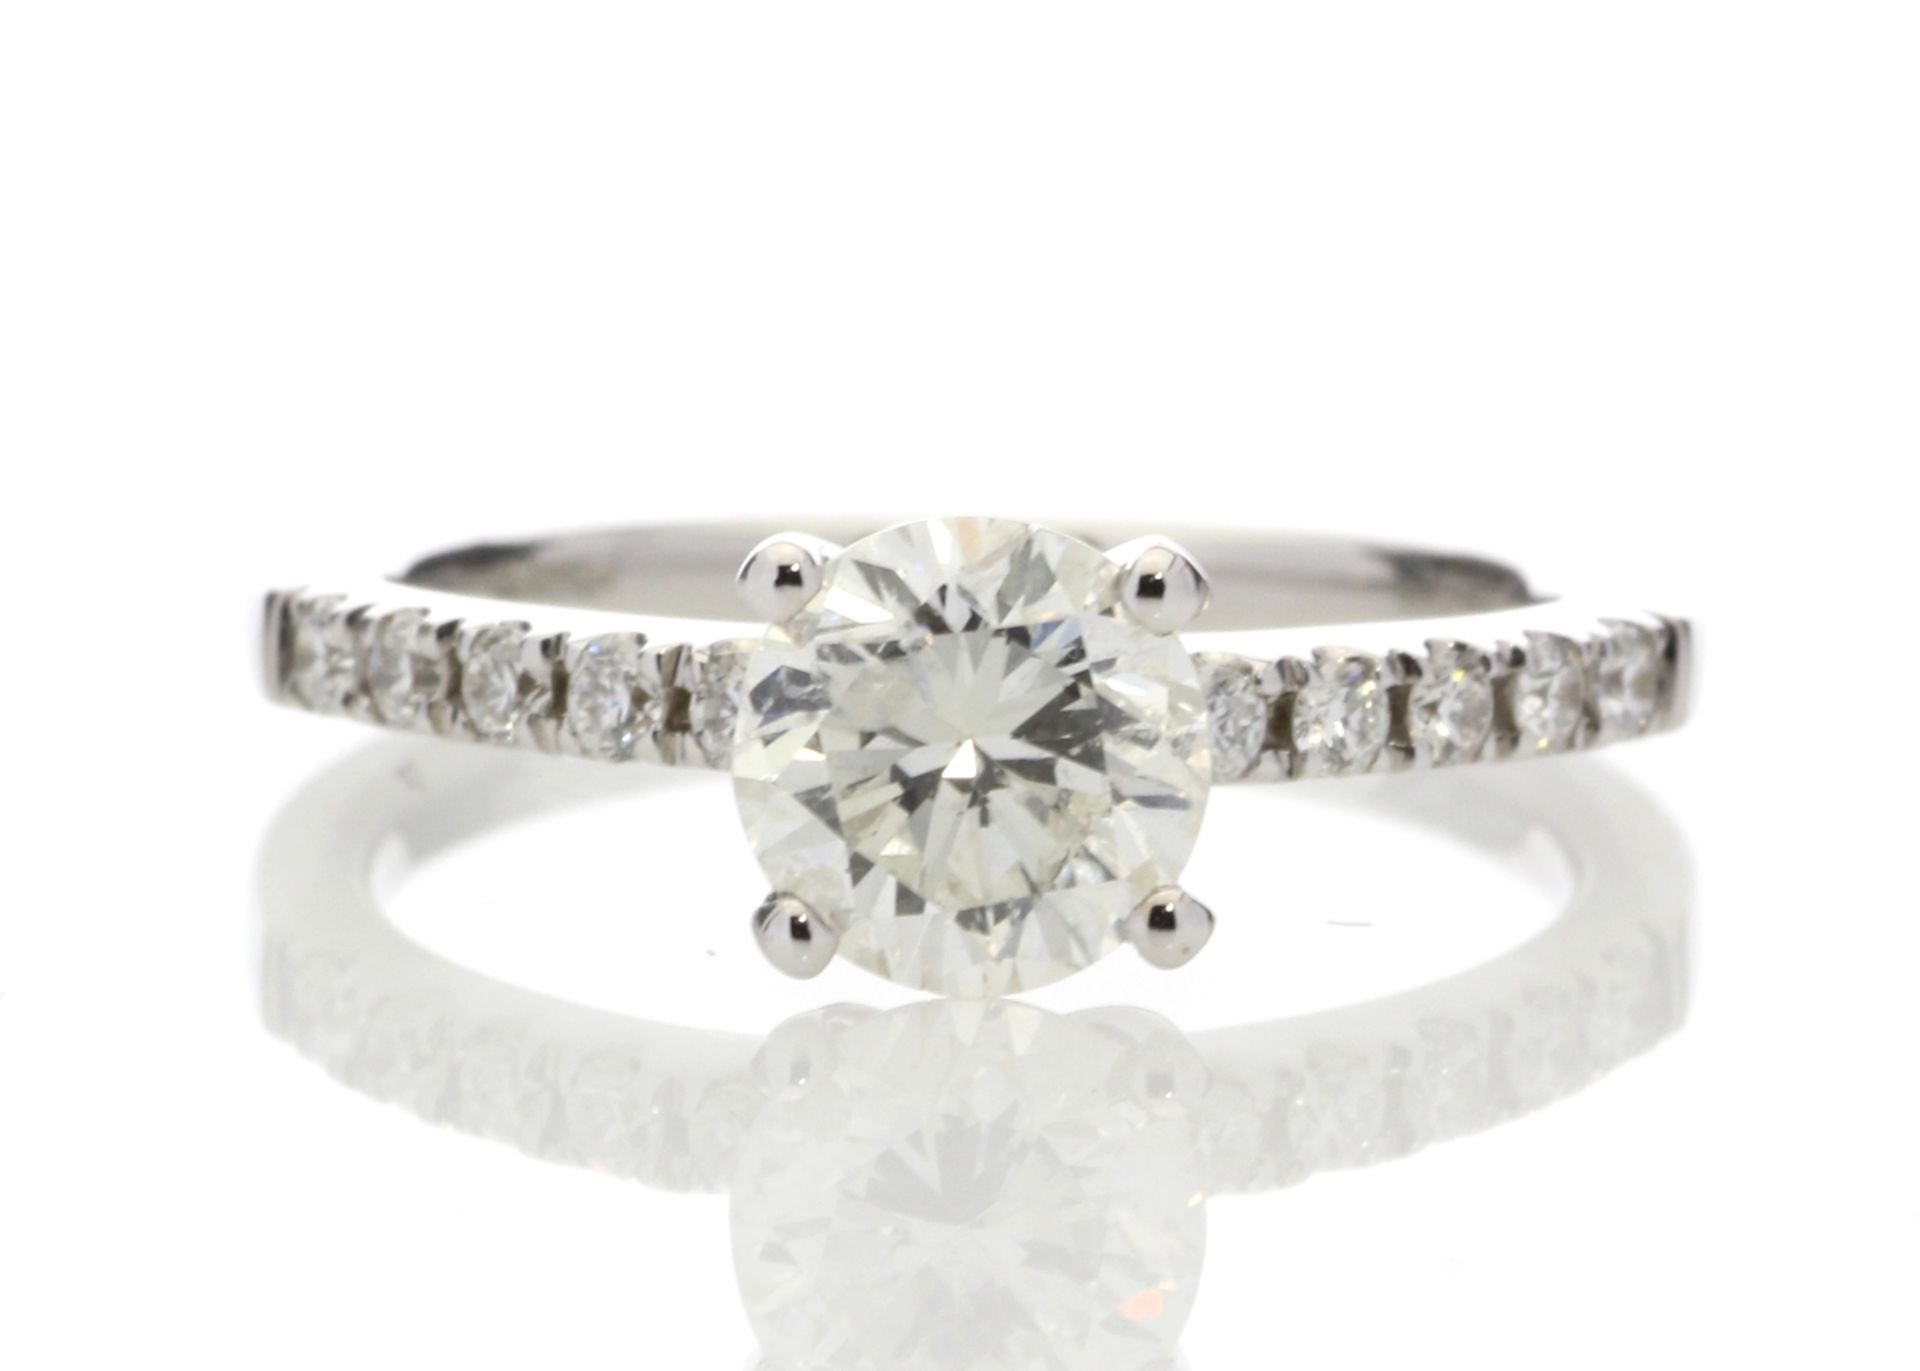 18ct White Gold Single Stone Diamond Ring With Stone Set Shoulders (1.07) 1.25 Carats - Valued by